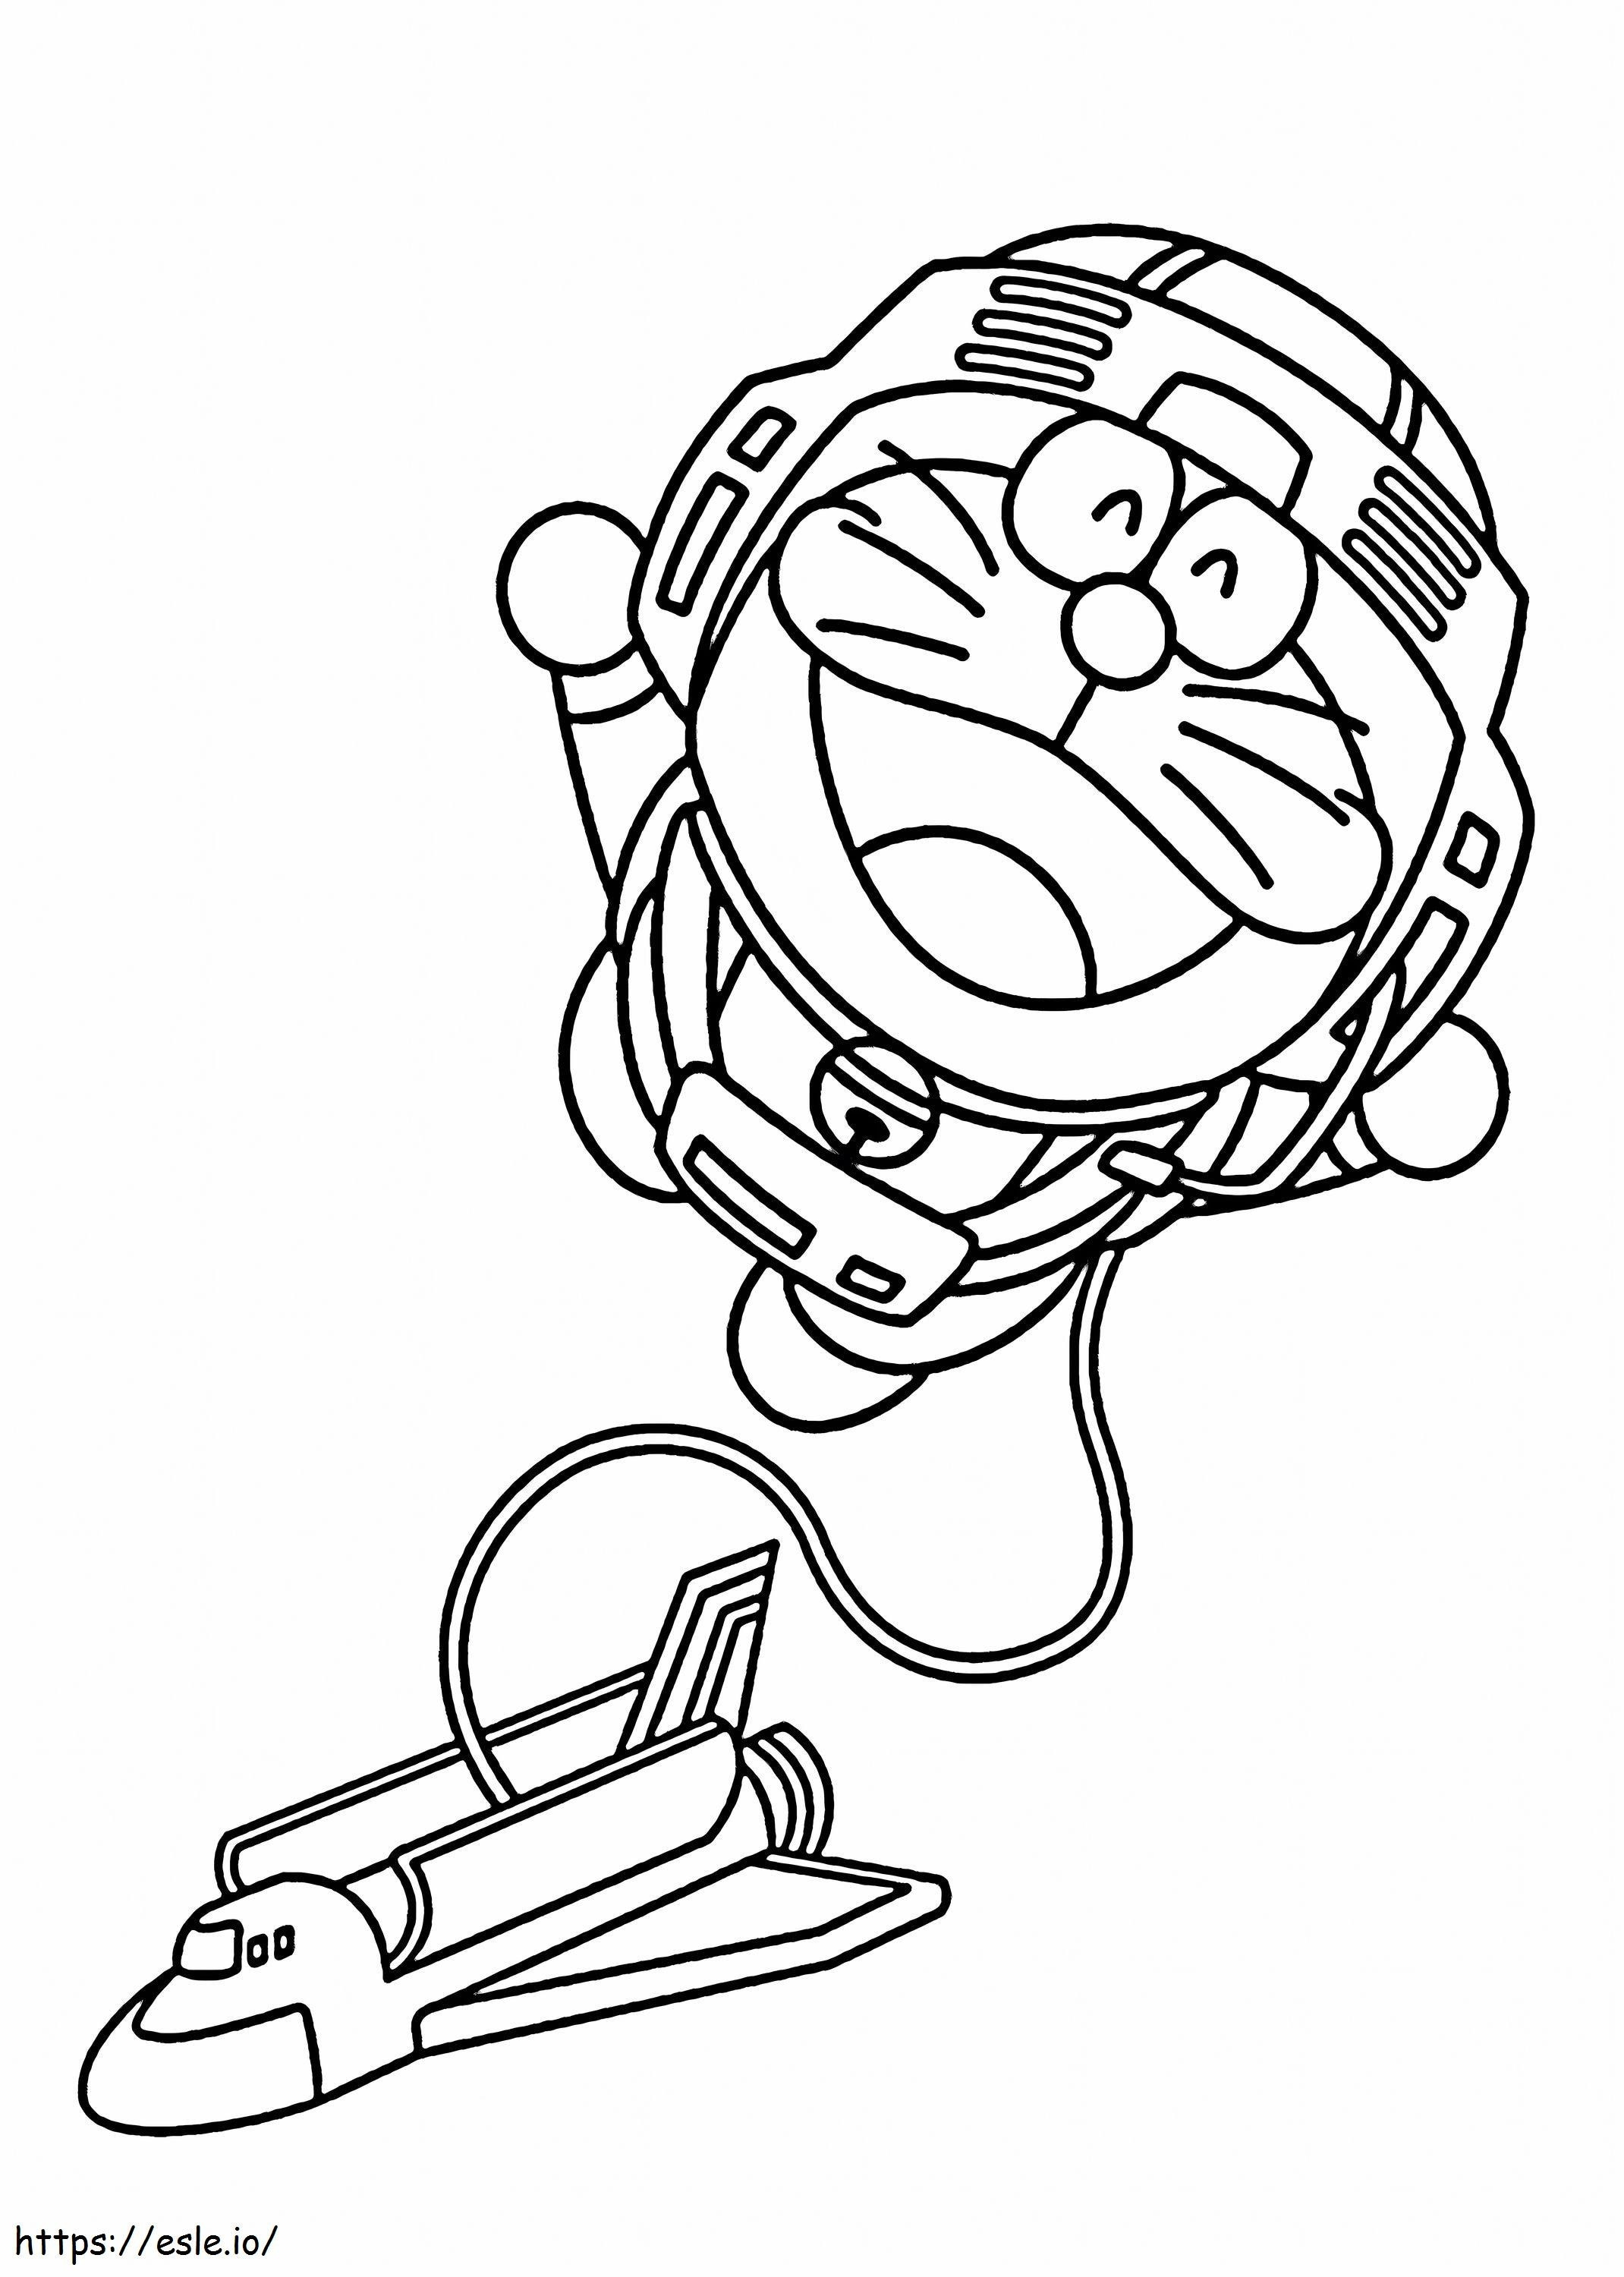 Cute Spiderman Cartoon Download 9 Q coloring page